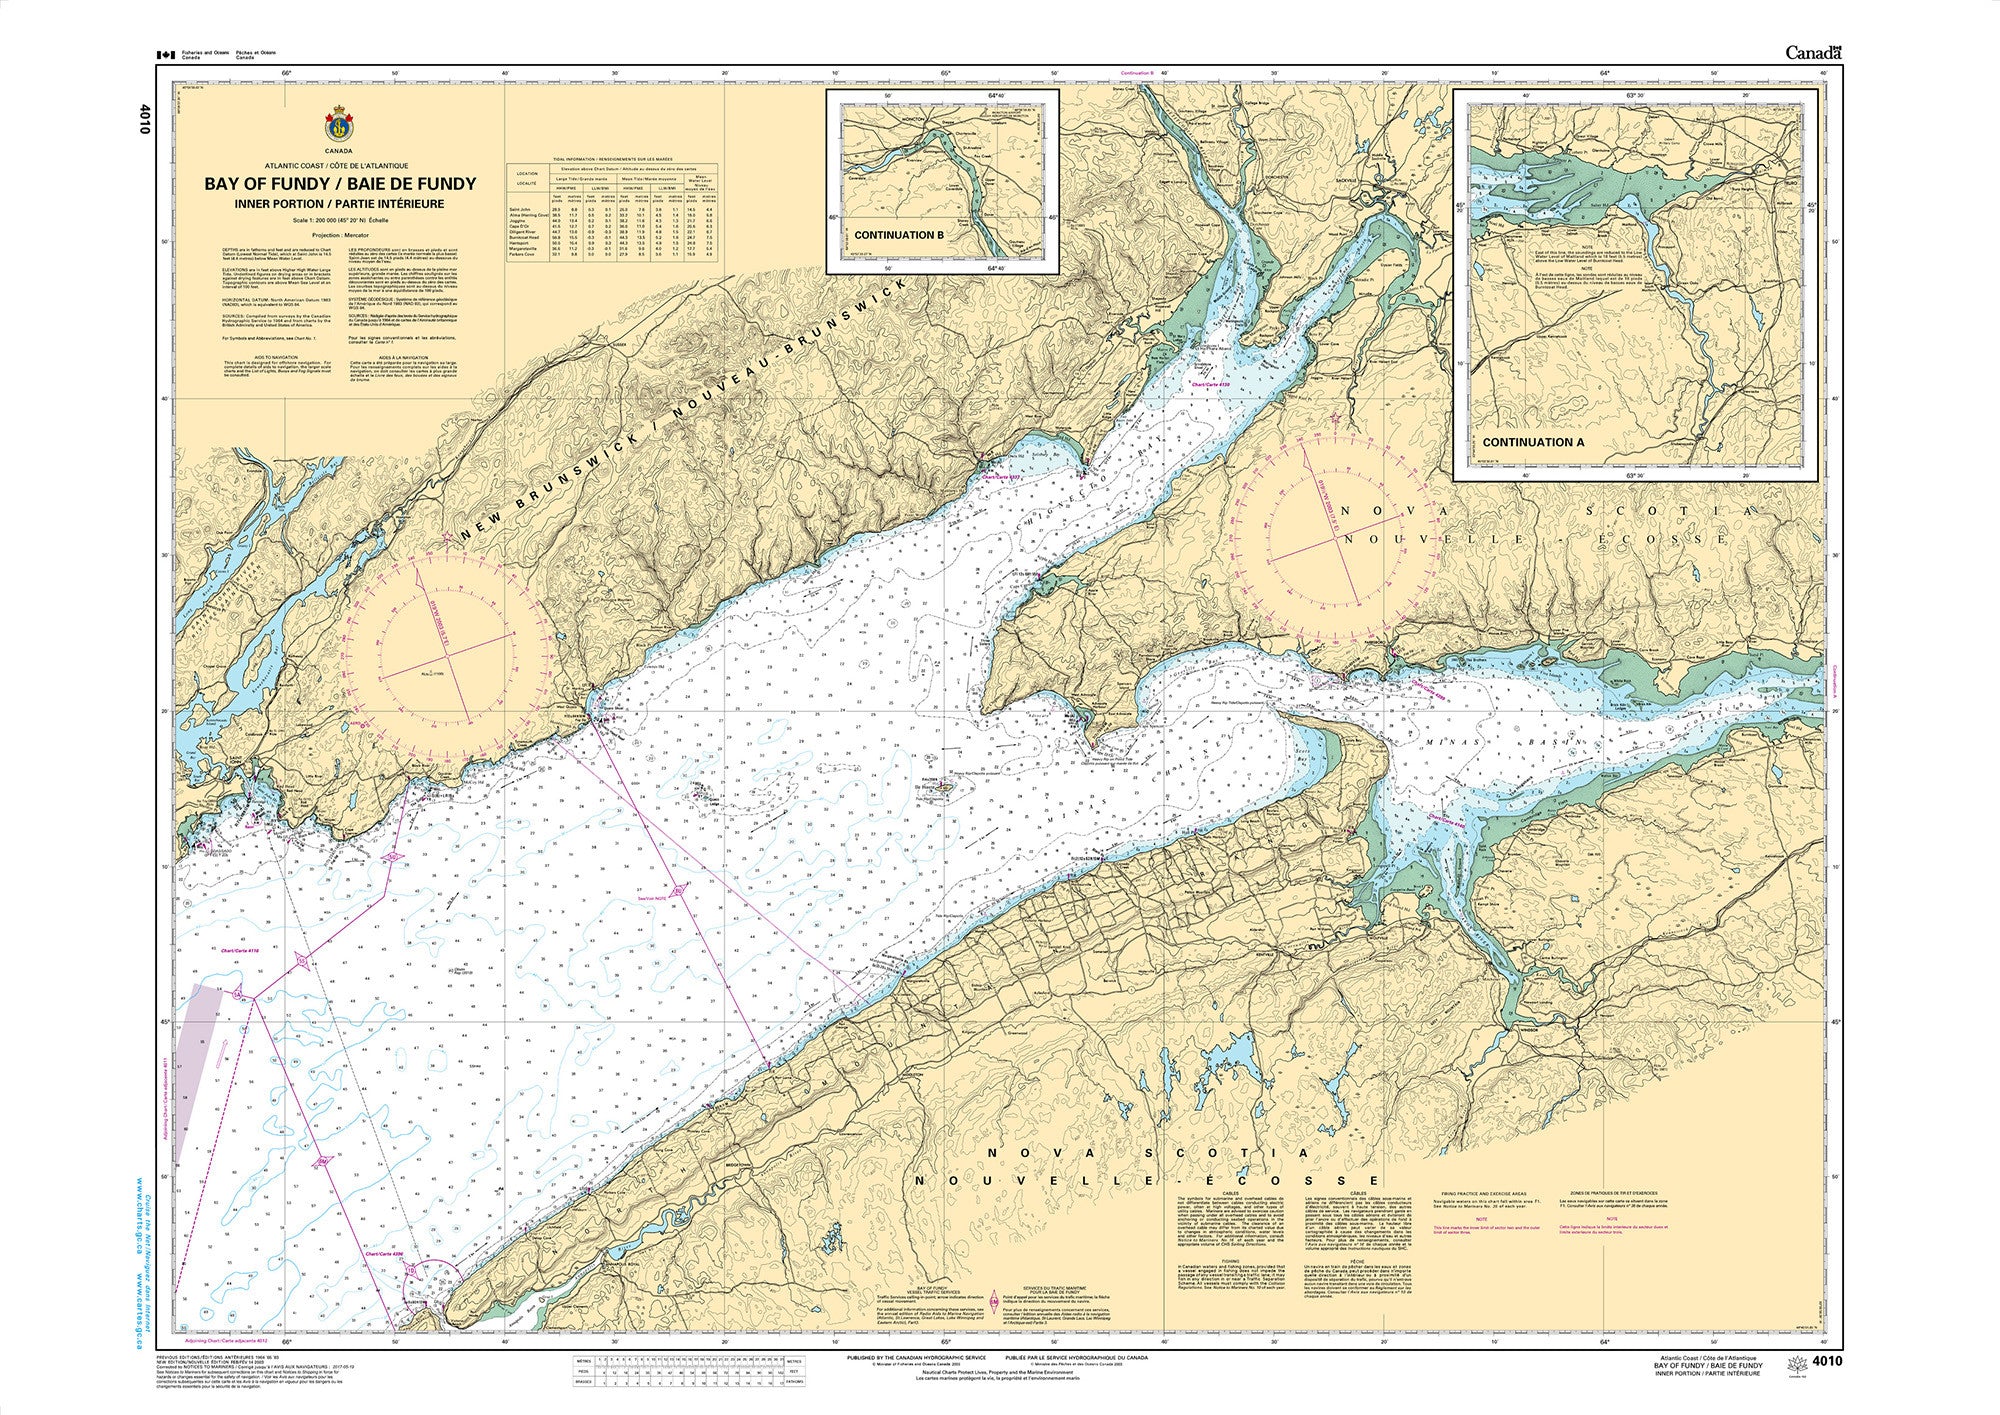 Canadian Hydrographic Service Nautical Chart CHS4010: Bay of Fundy / Baie de Fundy (Inner portion / partie intérieure)